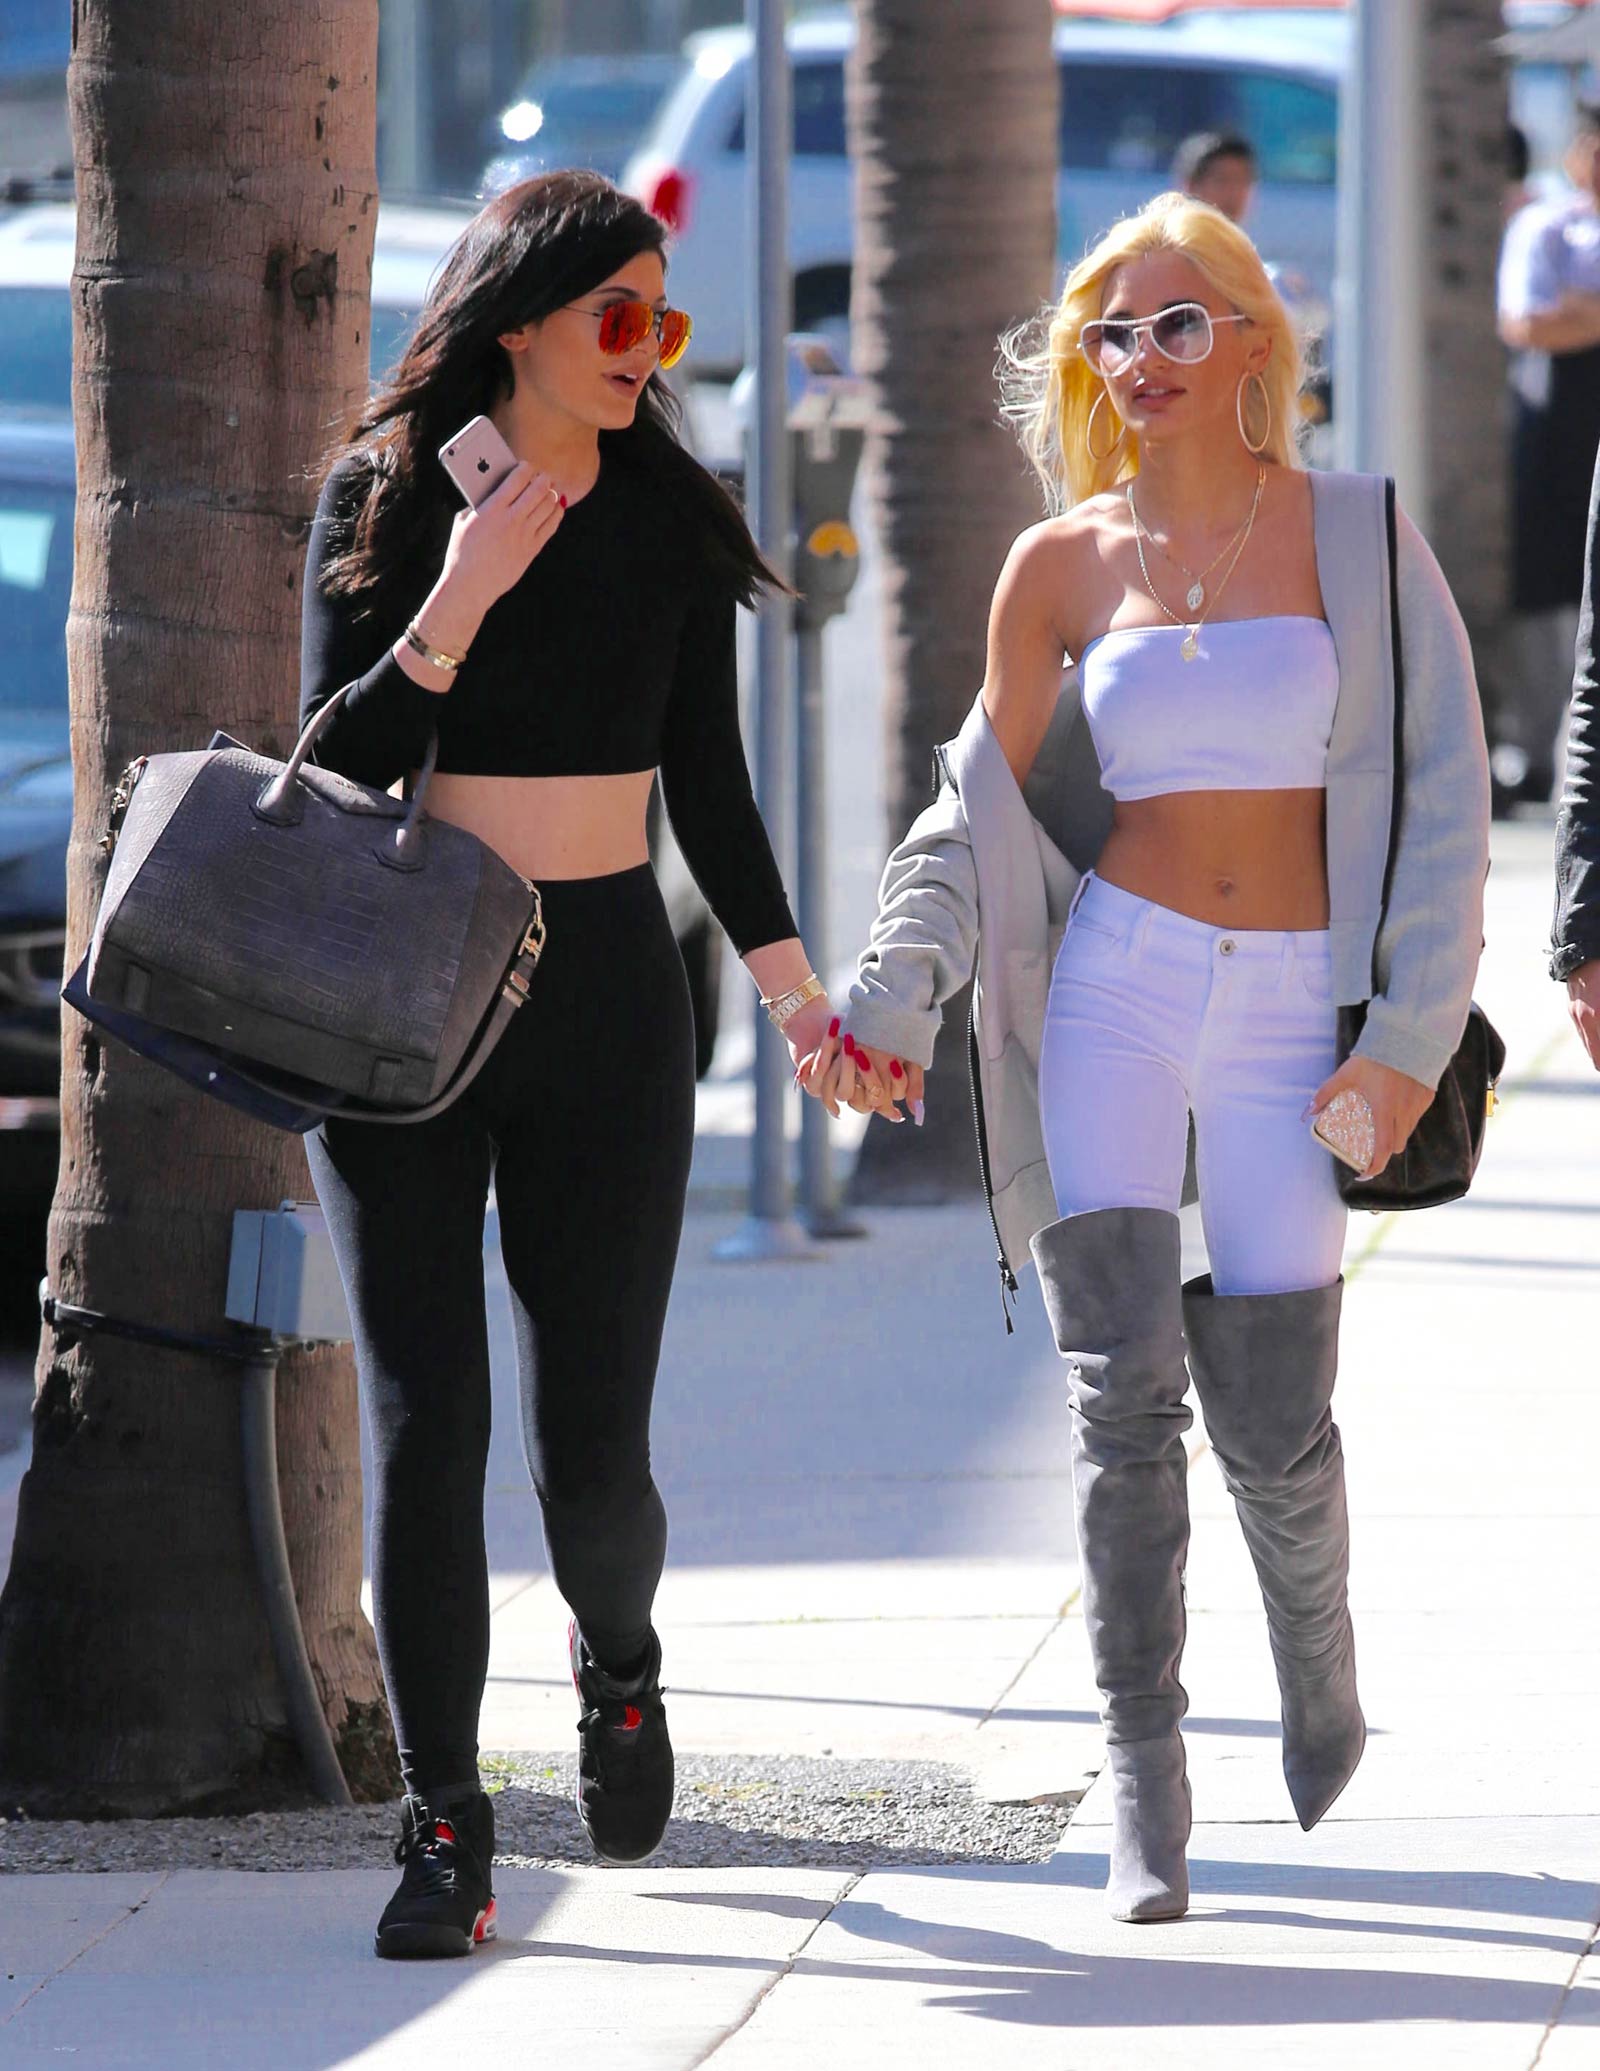 Kylie Jenner and Pia Mia Perez out in Calabasas